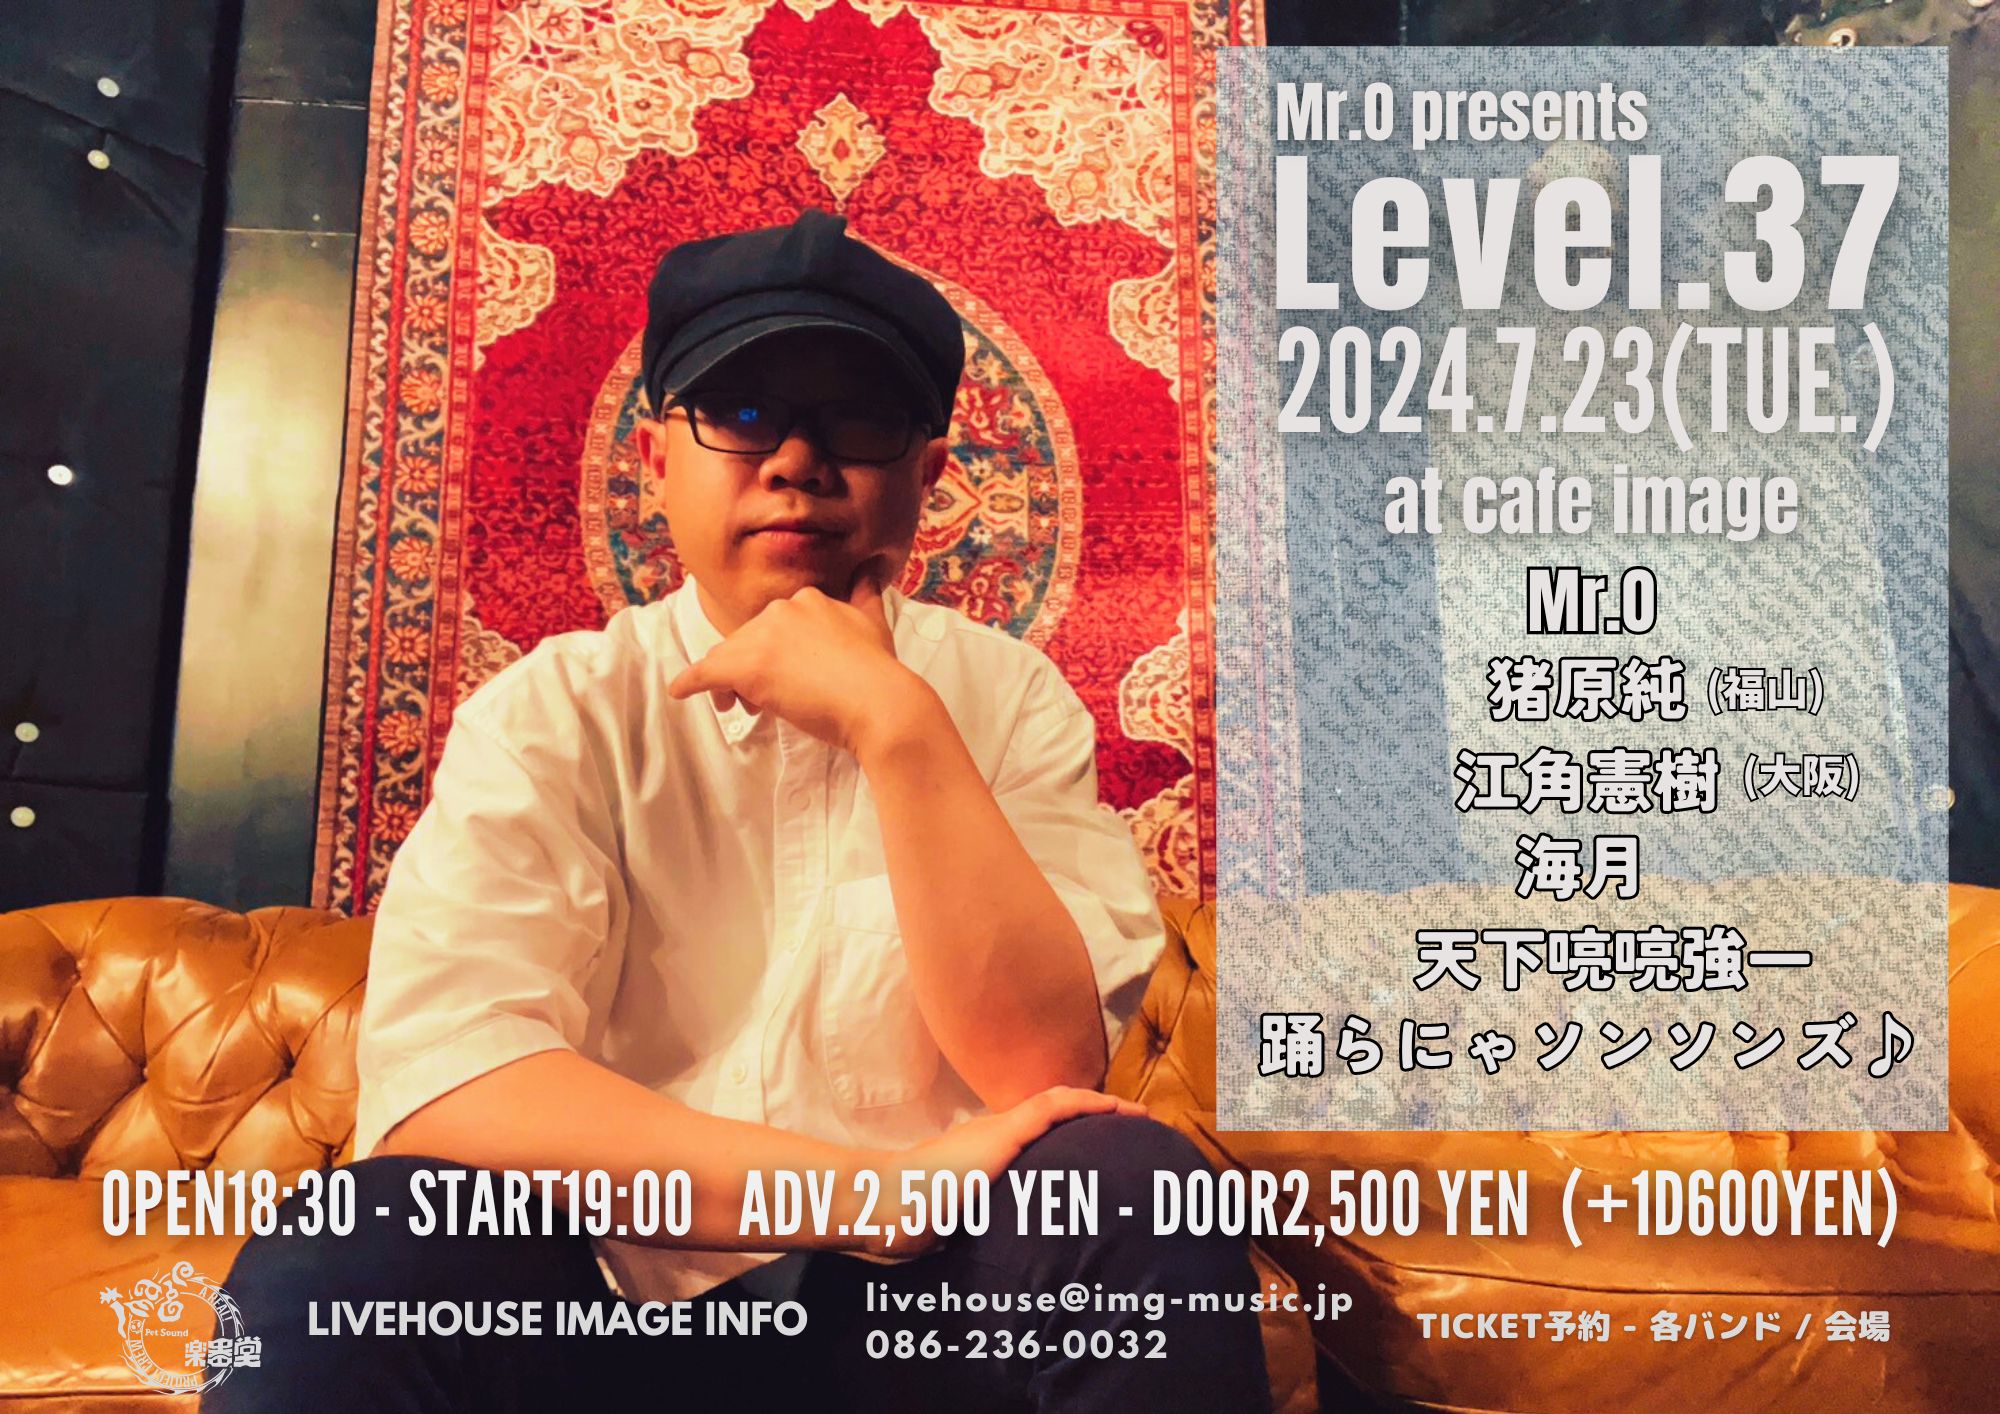 Mr.O presents Level.37 at CAFEimage